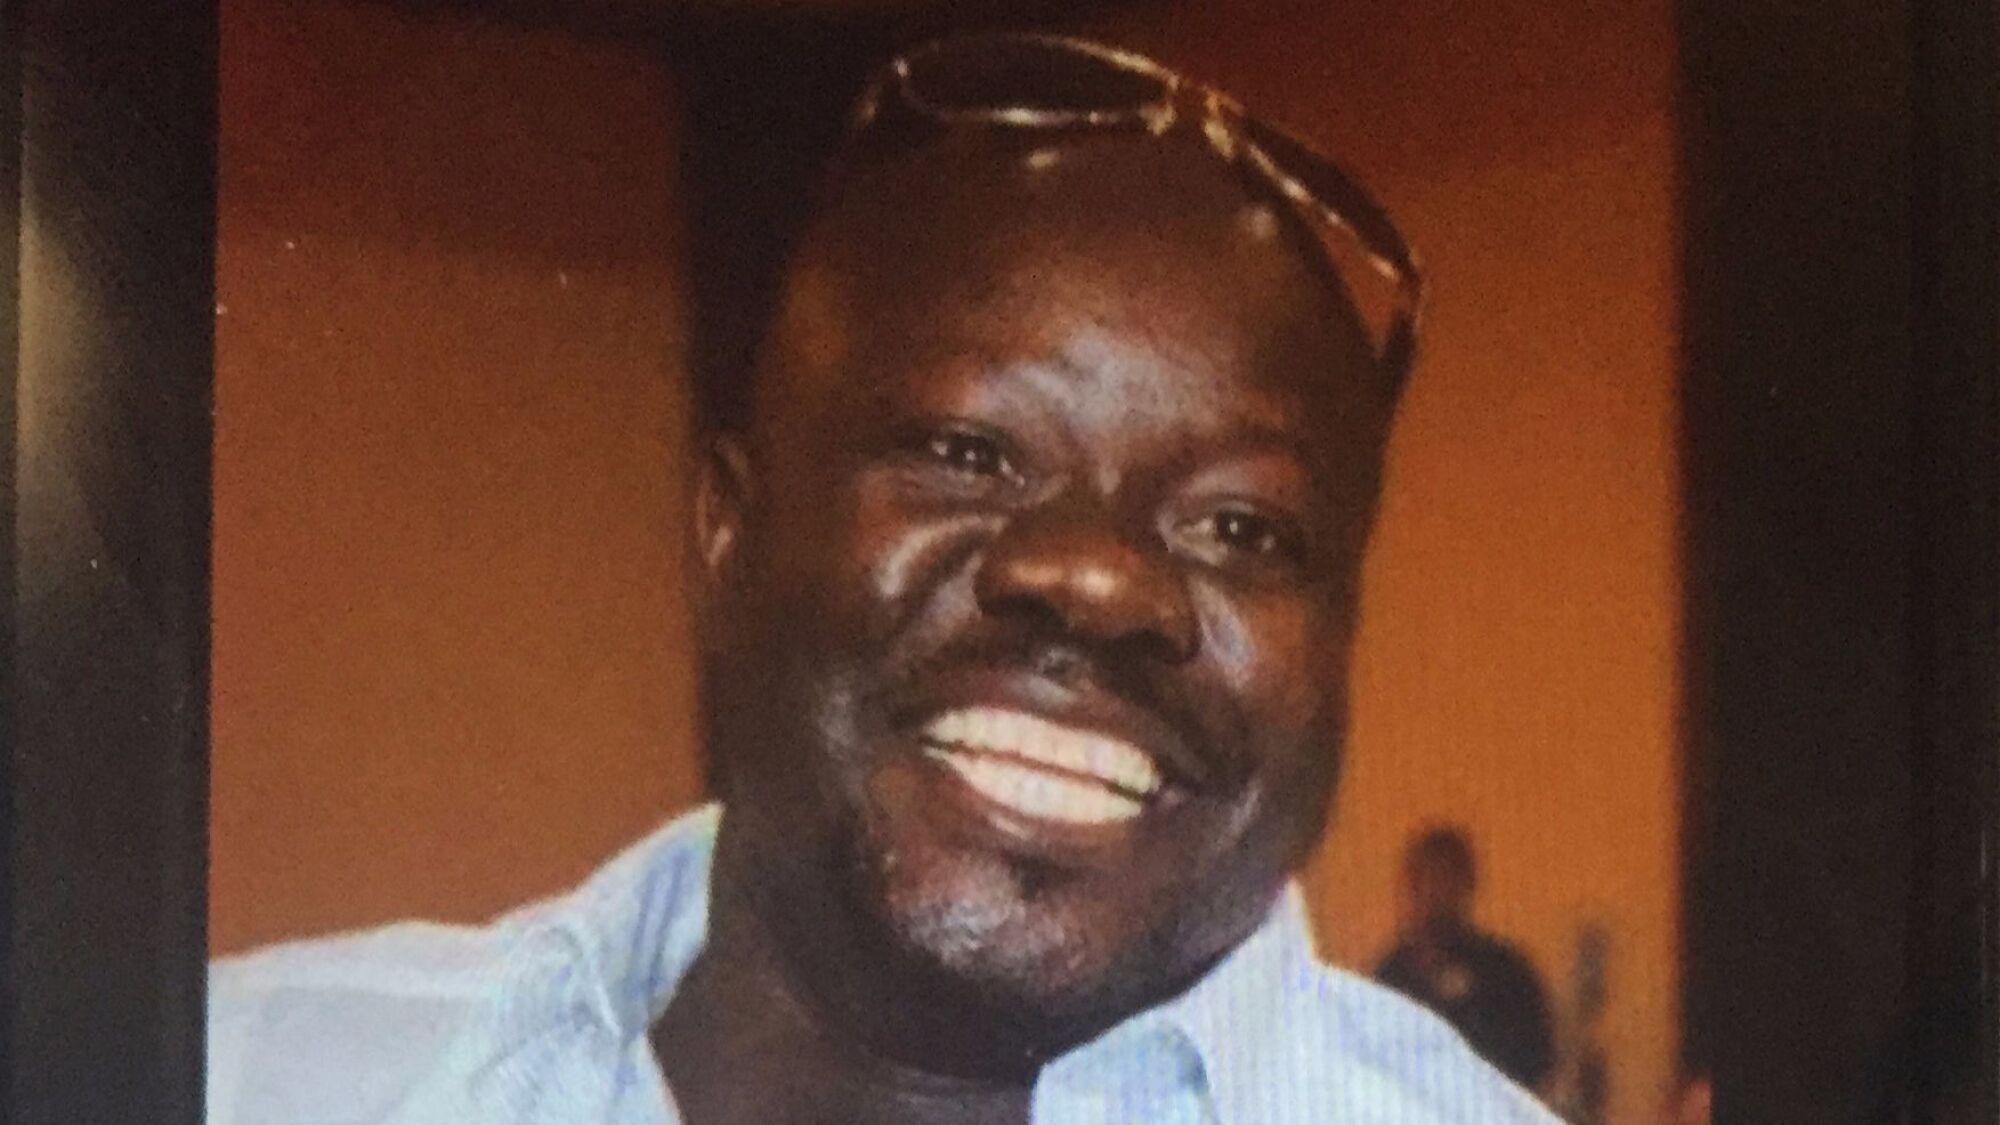 Alfred Olango, 38, was shot and killed in September 2016.